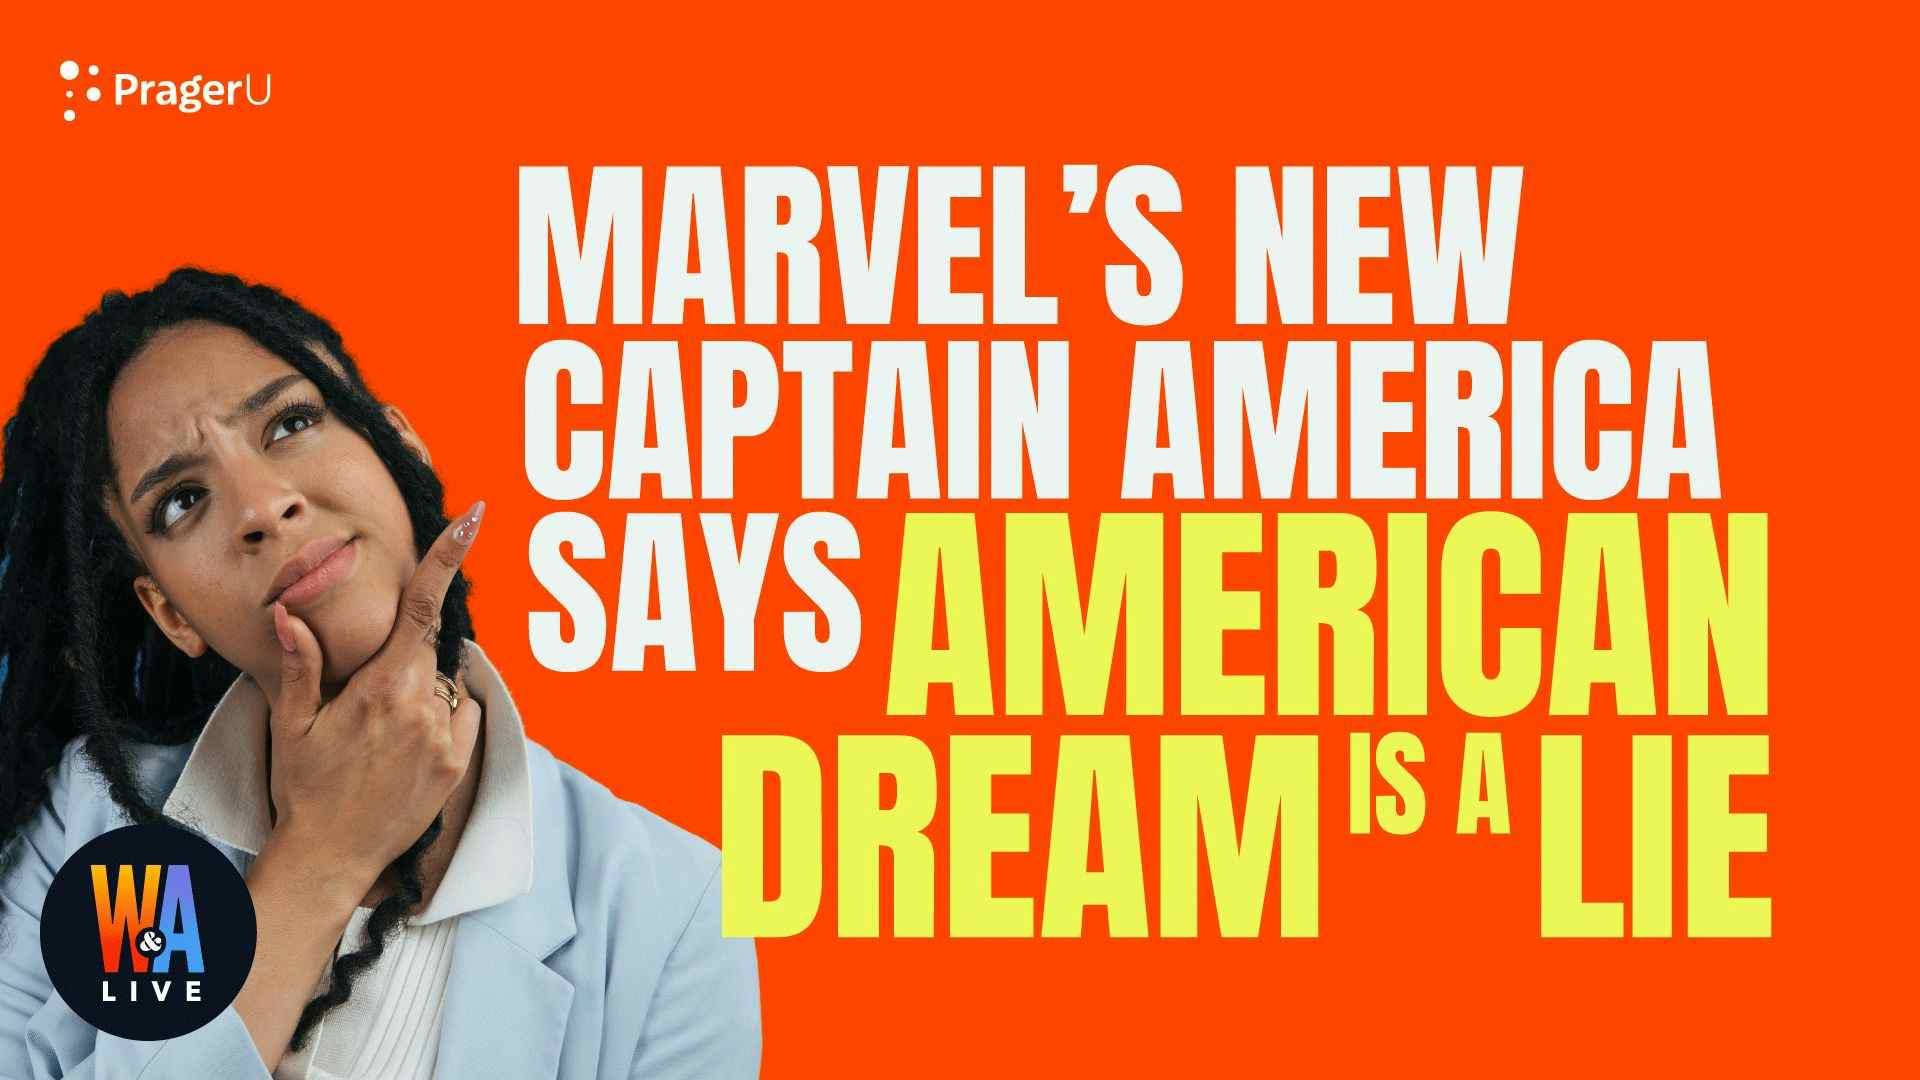 Marvel's New Captain America Goes Woke, Says American Dream Is a Lie